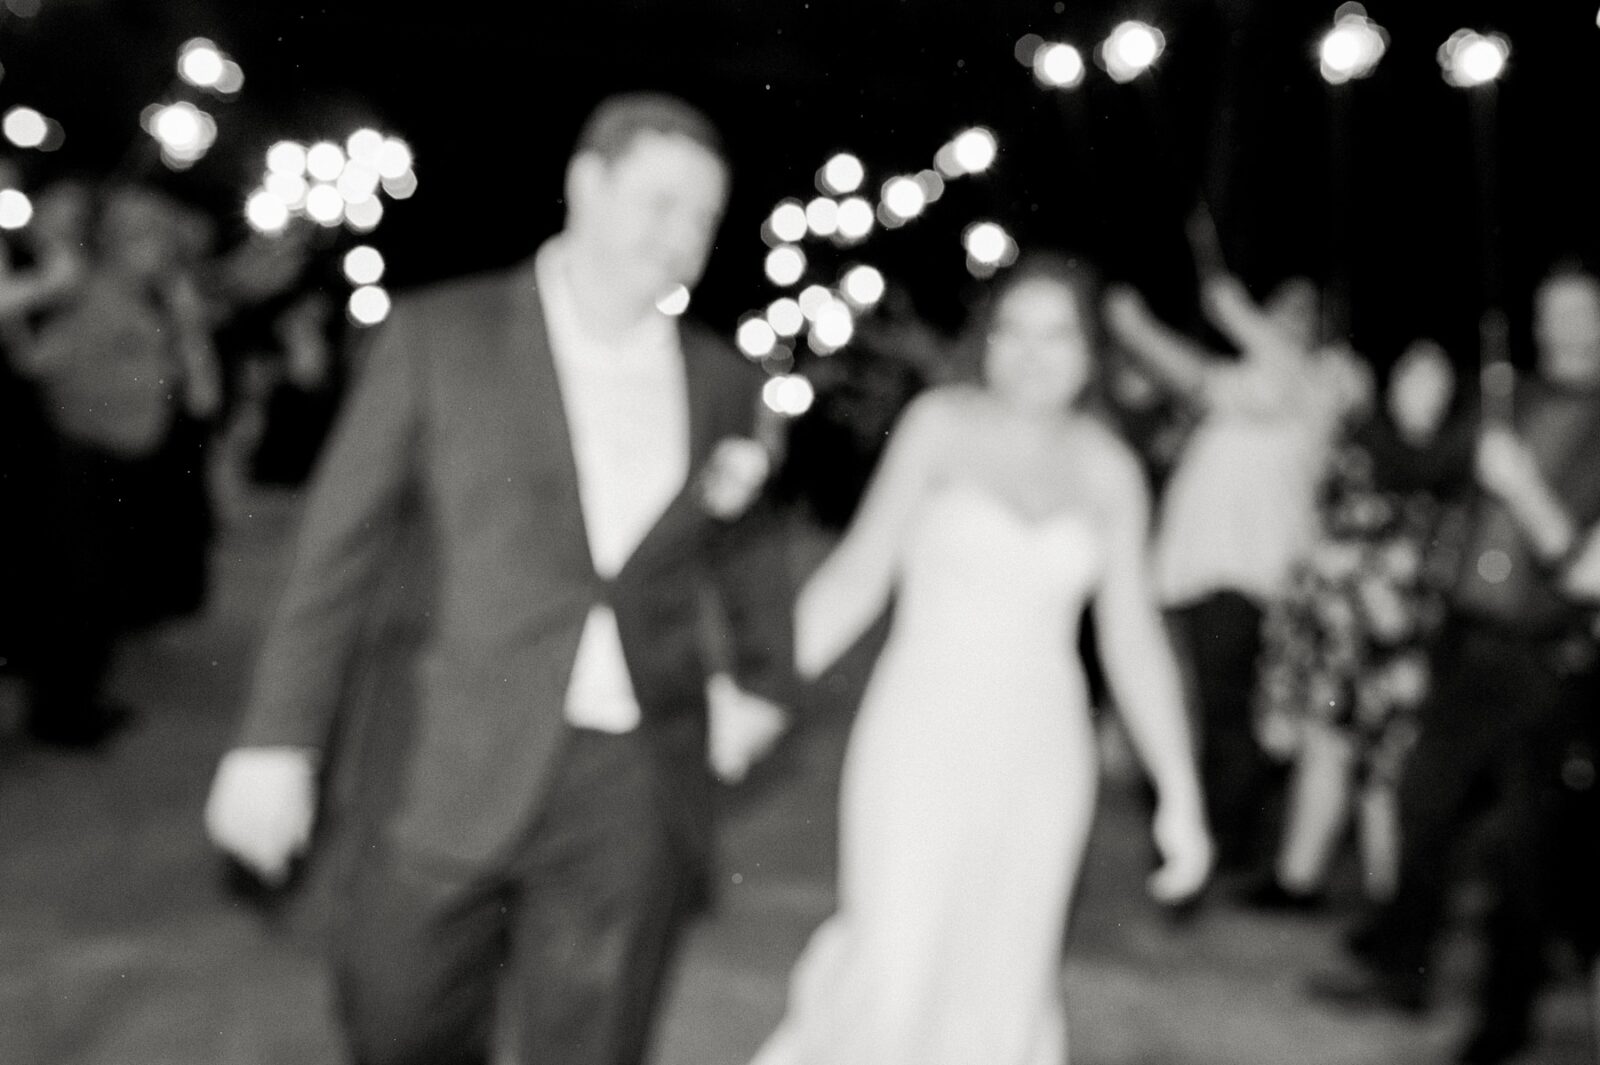 blurry wedding photos, wedding photography trends, blurry wedding photography trend, black and white sparkler exit, reception dancing, guests dancing at wedding, videre estate reception space, wedding at the videre estate venue, wimberley, 